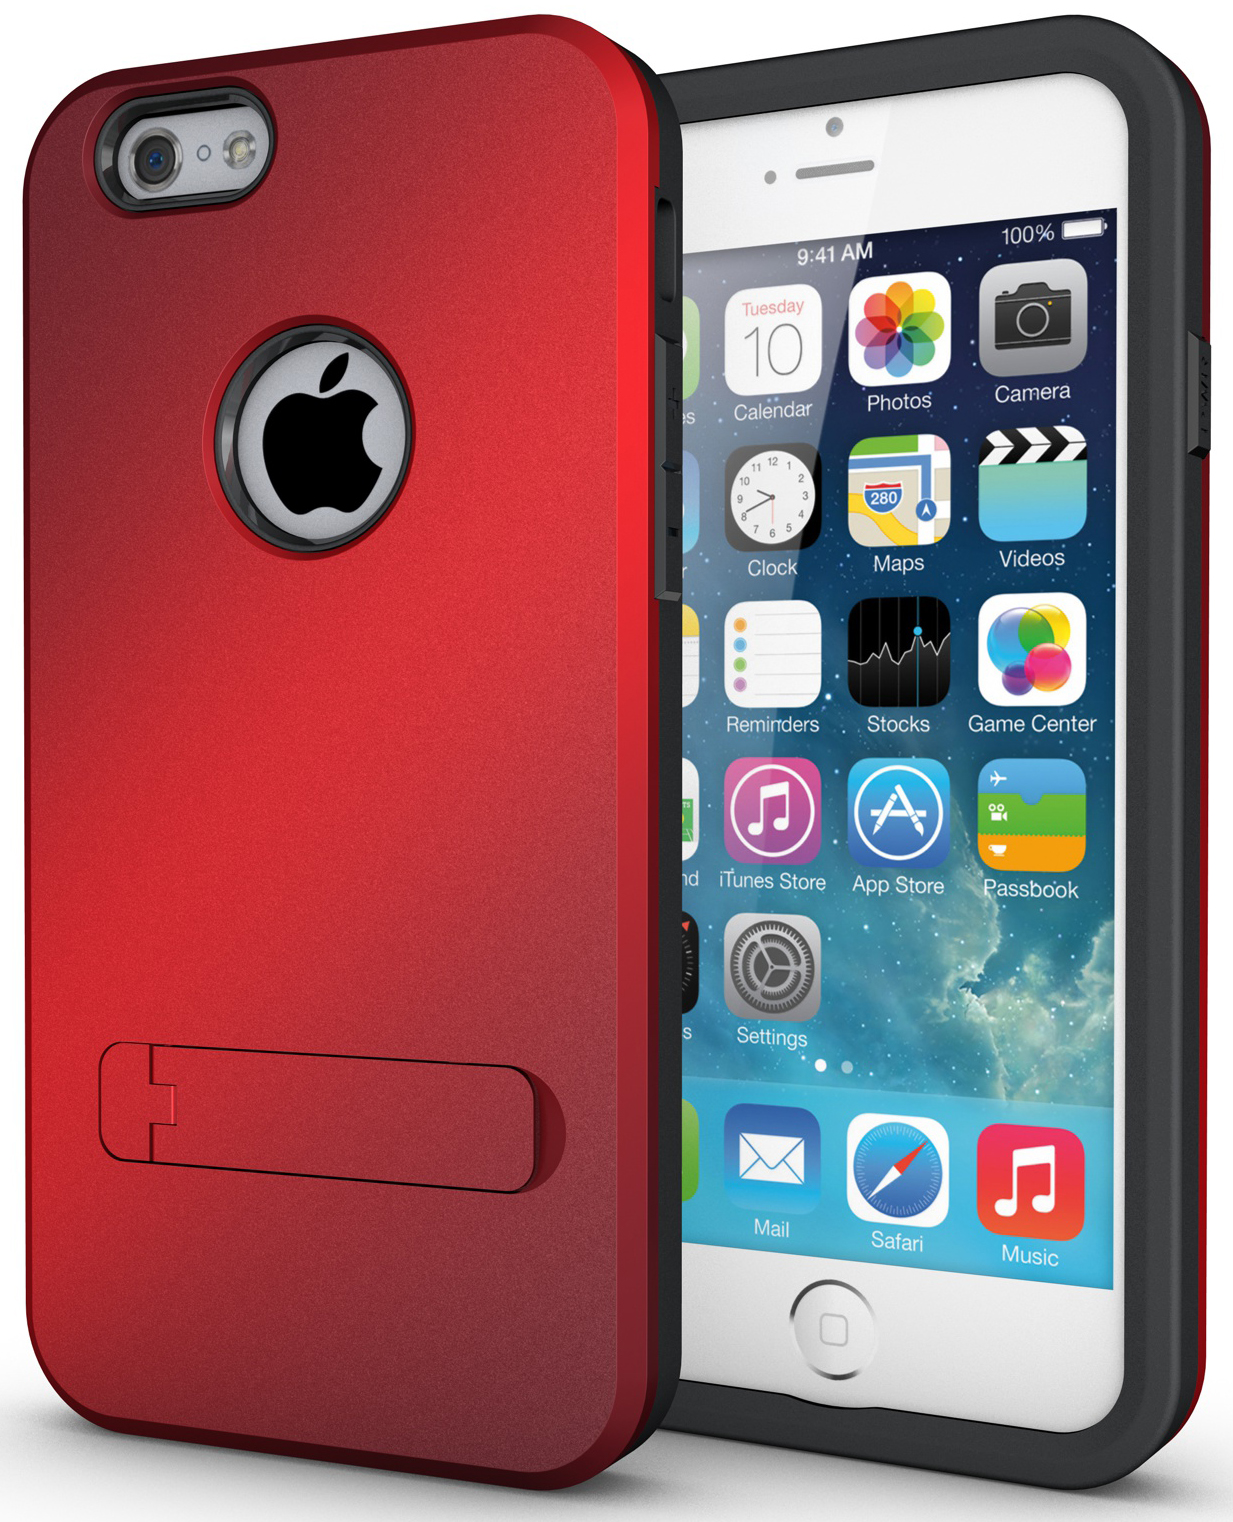 Nakedcellphone RED SLIM TOUGH SHIELD MATTE ARMOR HYBRID CASE COVER SKIN FOR iPHONE 6 4.7"